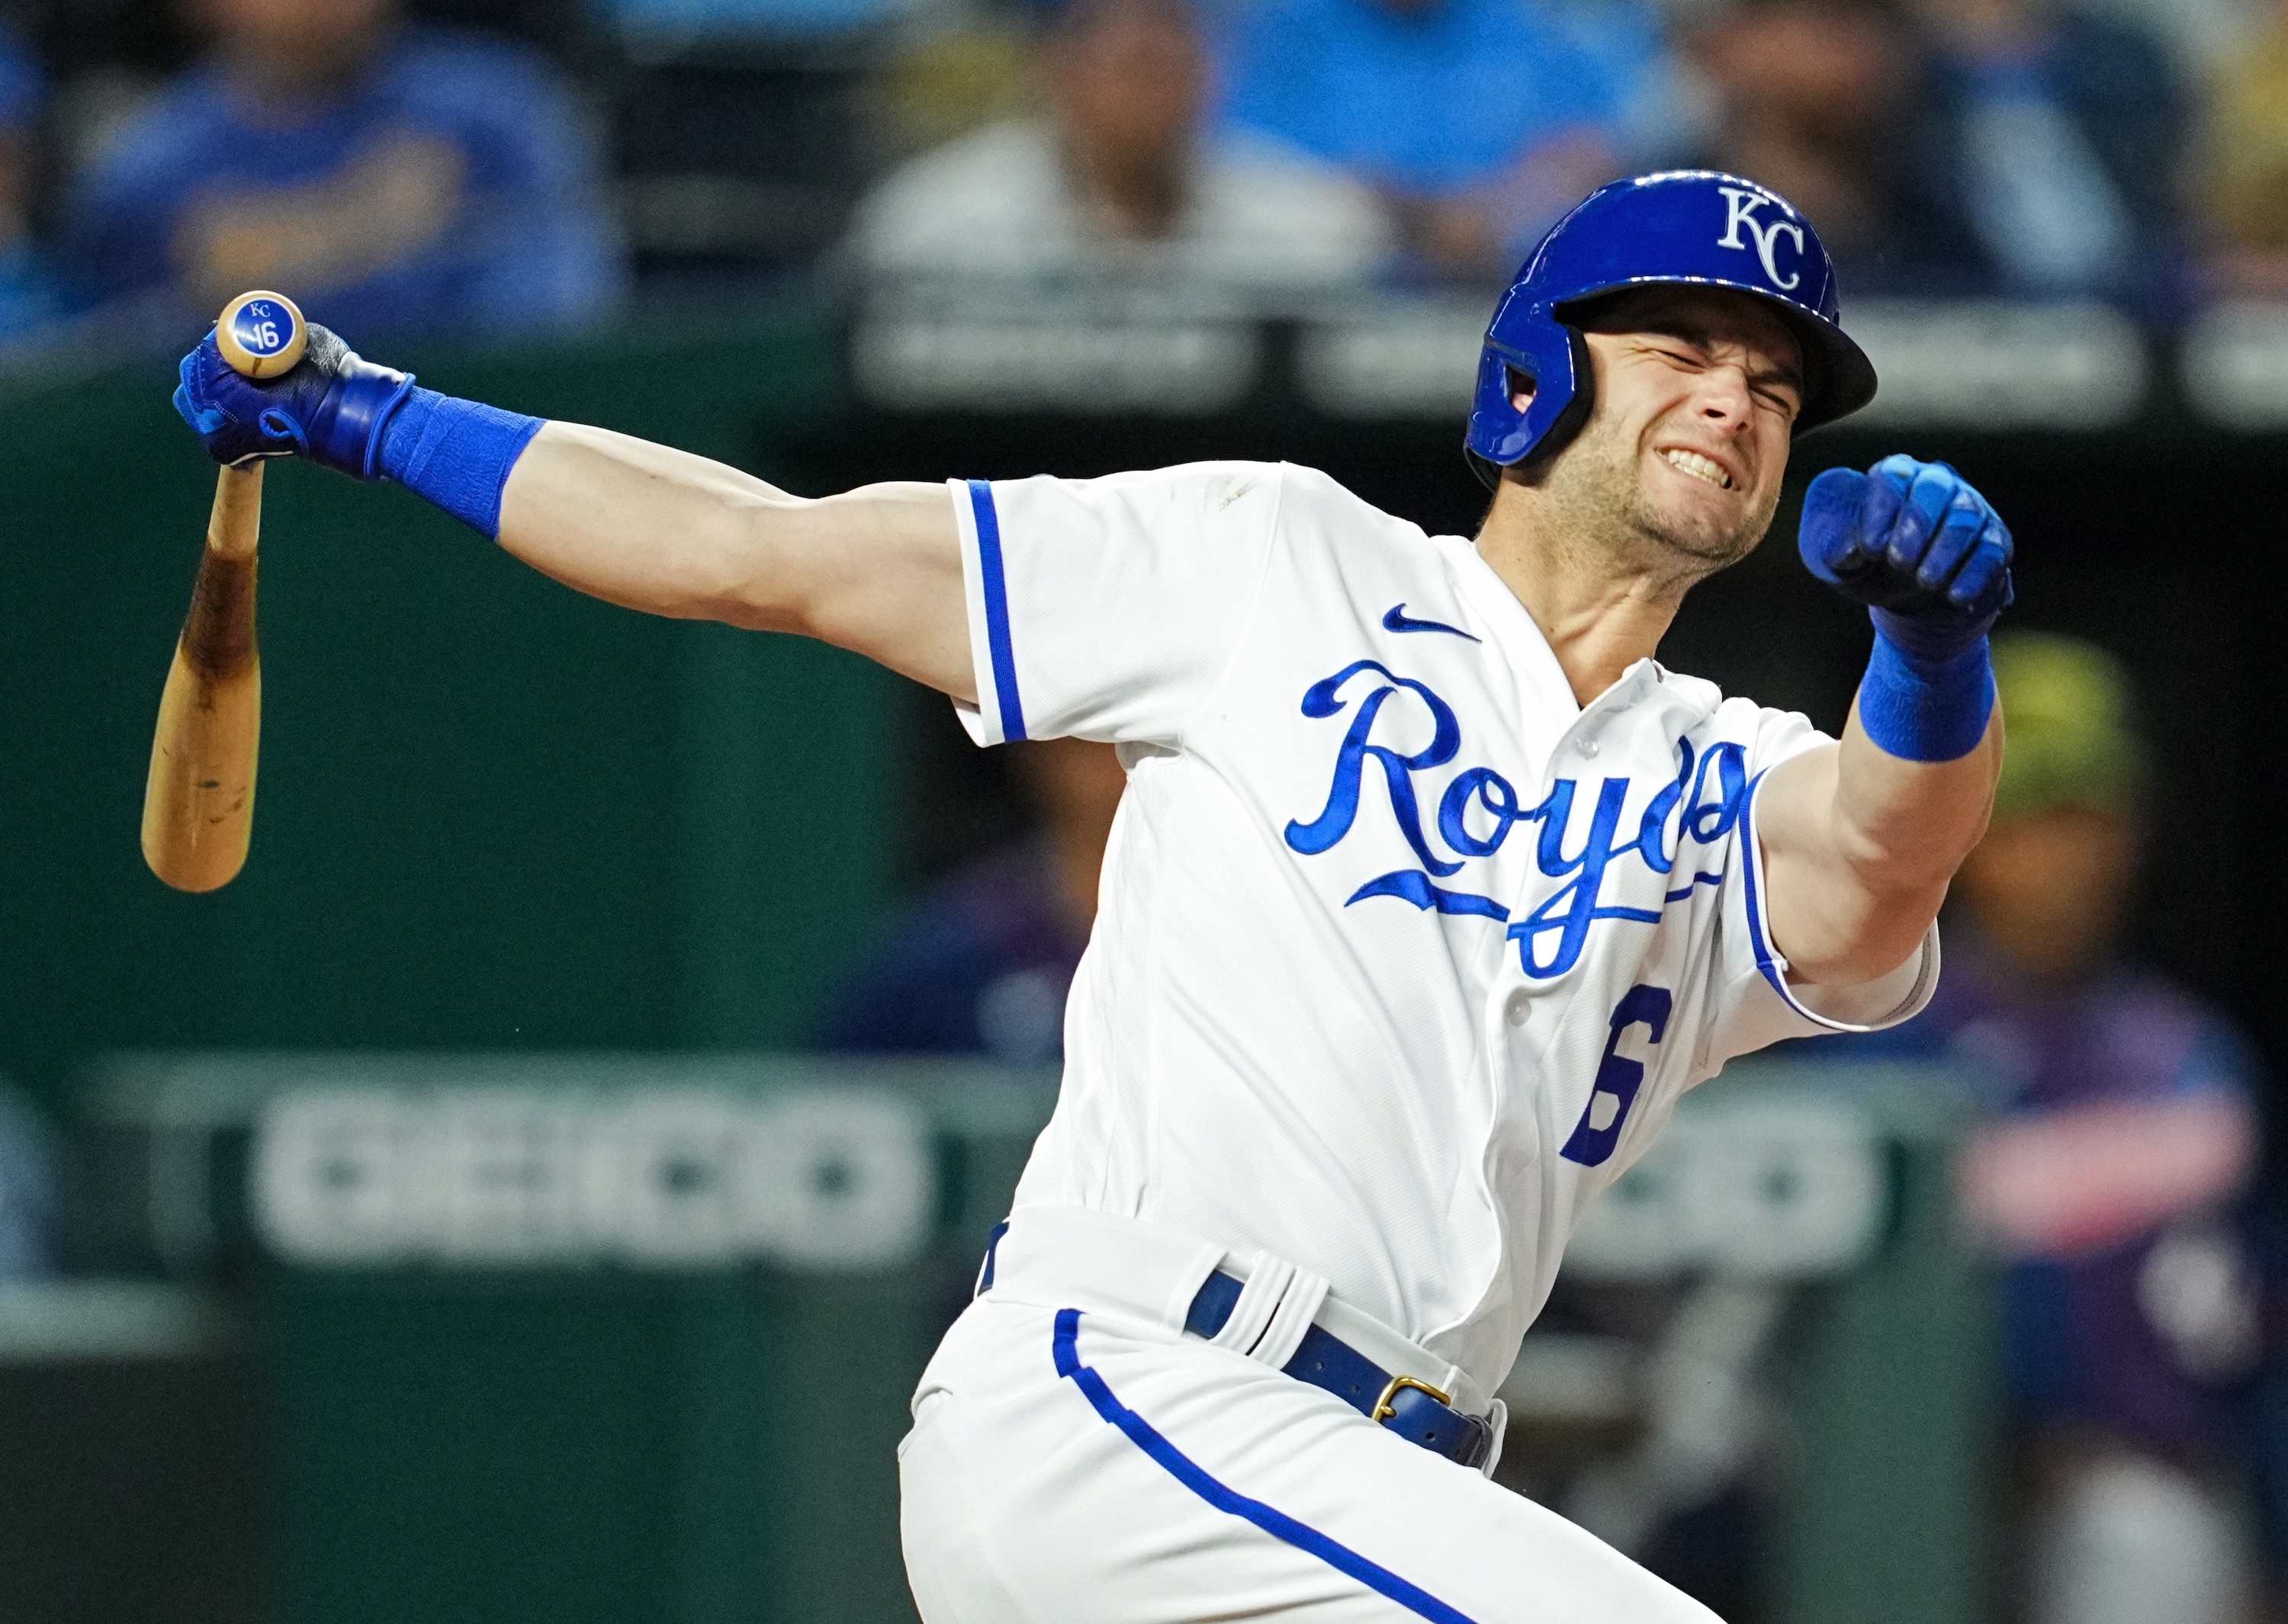 Andrew Benintendi #16 of the Kansas City Royals reacts after fouling a ball off of his leg during the seventh inning against the Minnesota Twins at Kauffman Stadium on May 20, 2022 in Kansas City, Missouri.